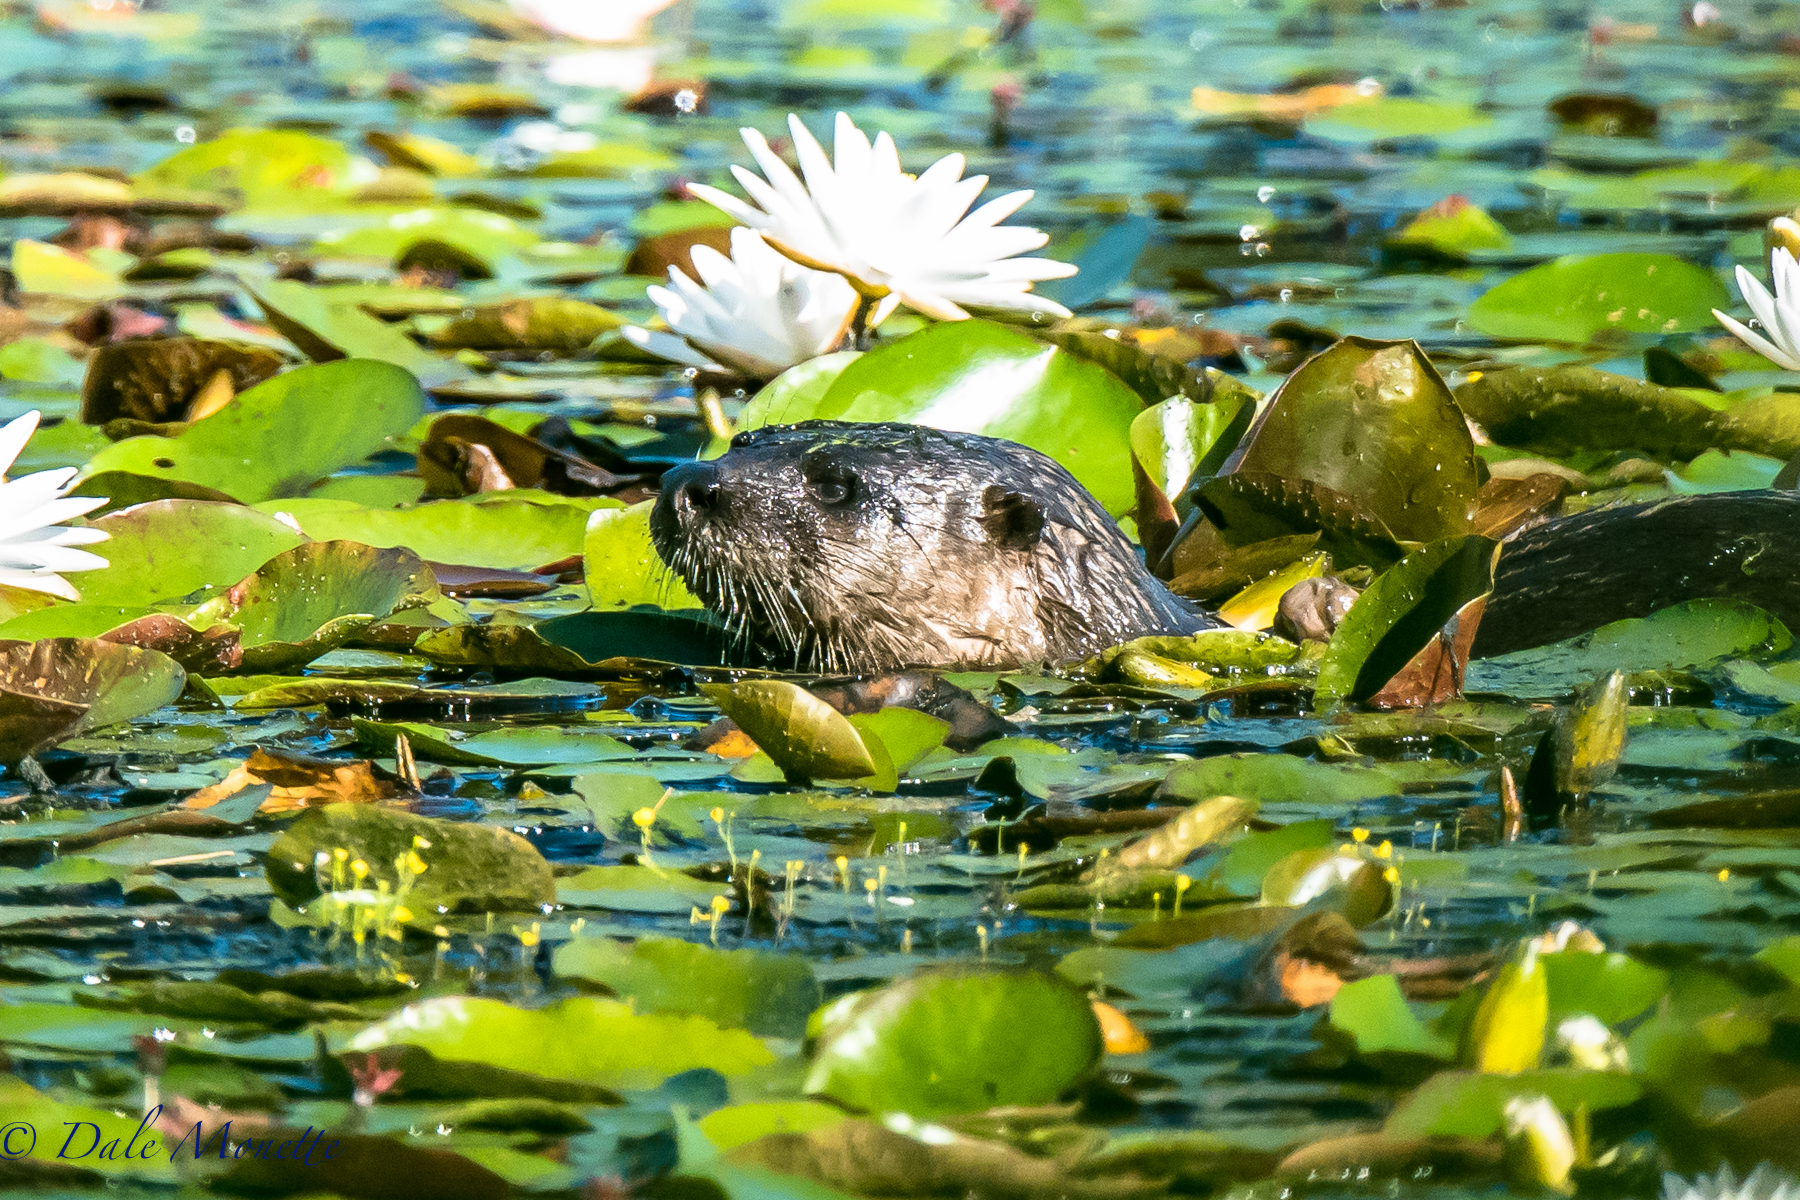   A northern river otter found me this morning. &nbsp;They are hard to see in the summer because they like to stay hidden in the lily pads. &nbsp;The click of my camera was to much for this ones curiosity and he just had to stop and check me out! &nb